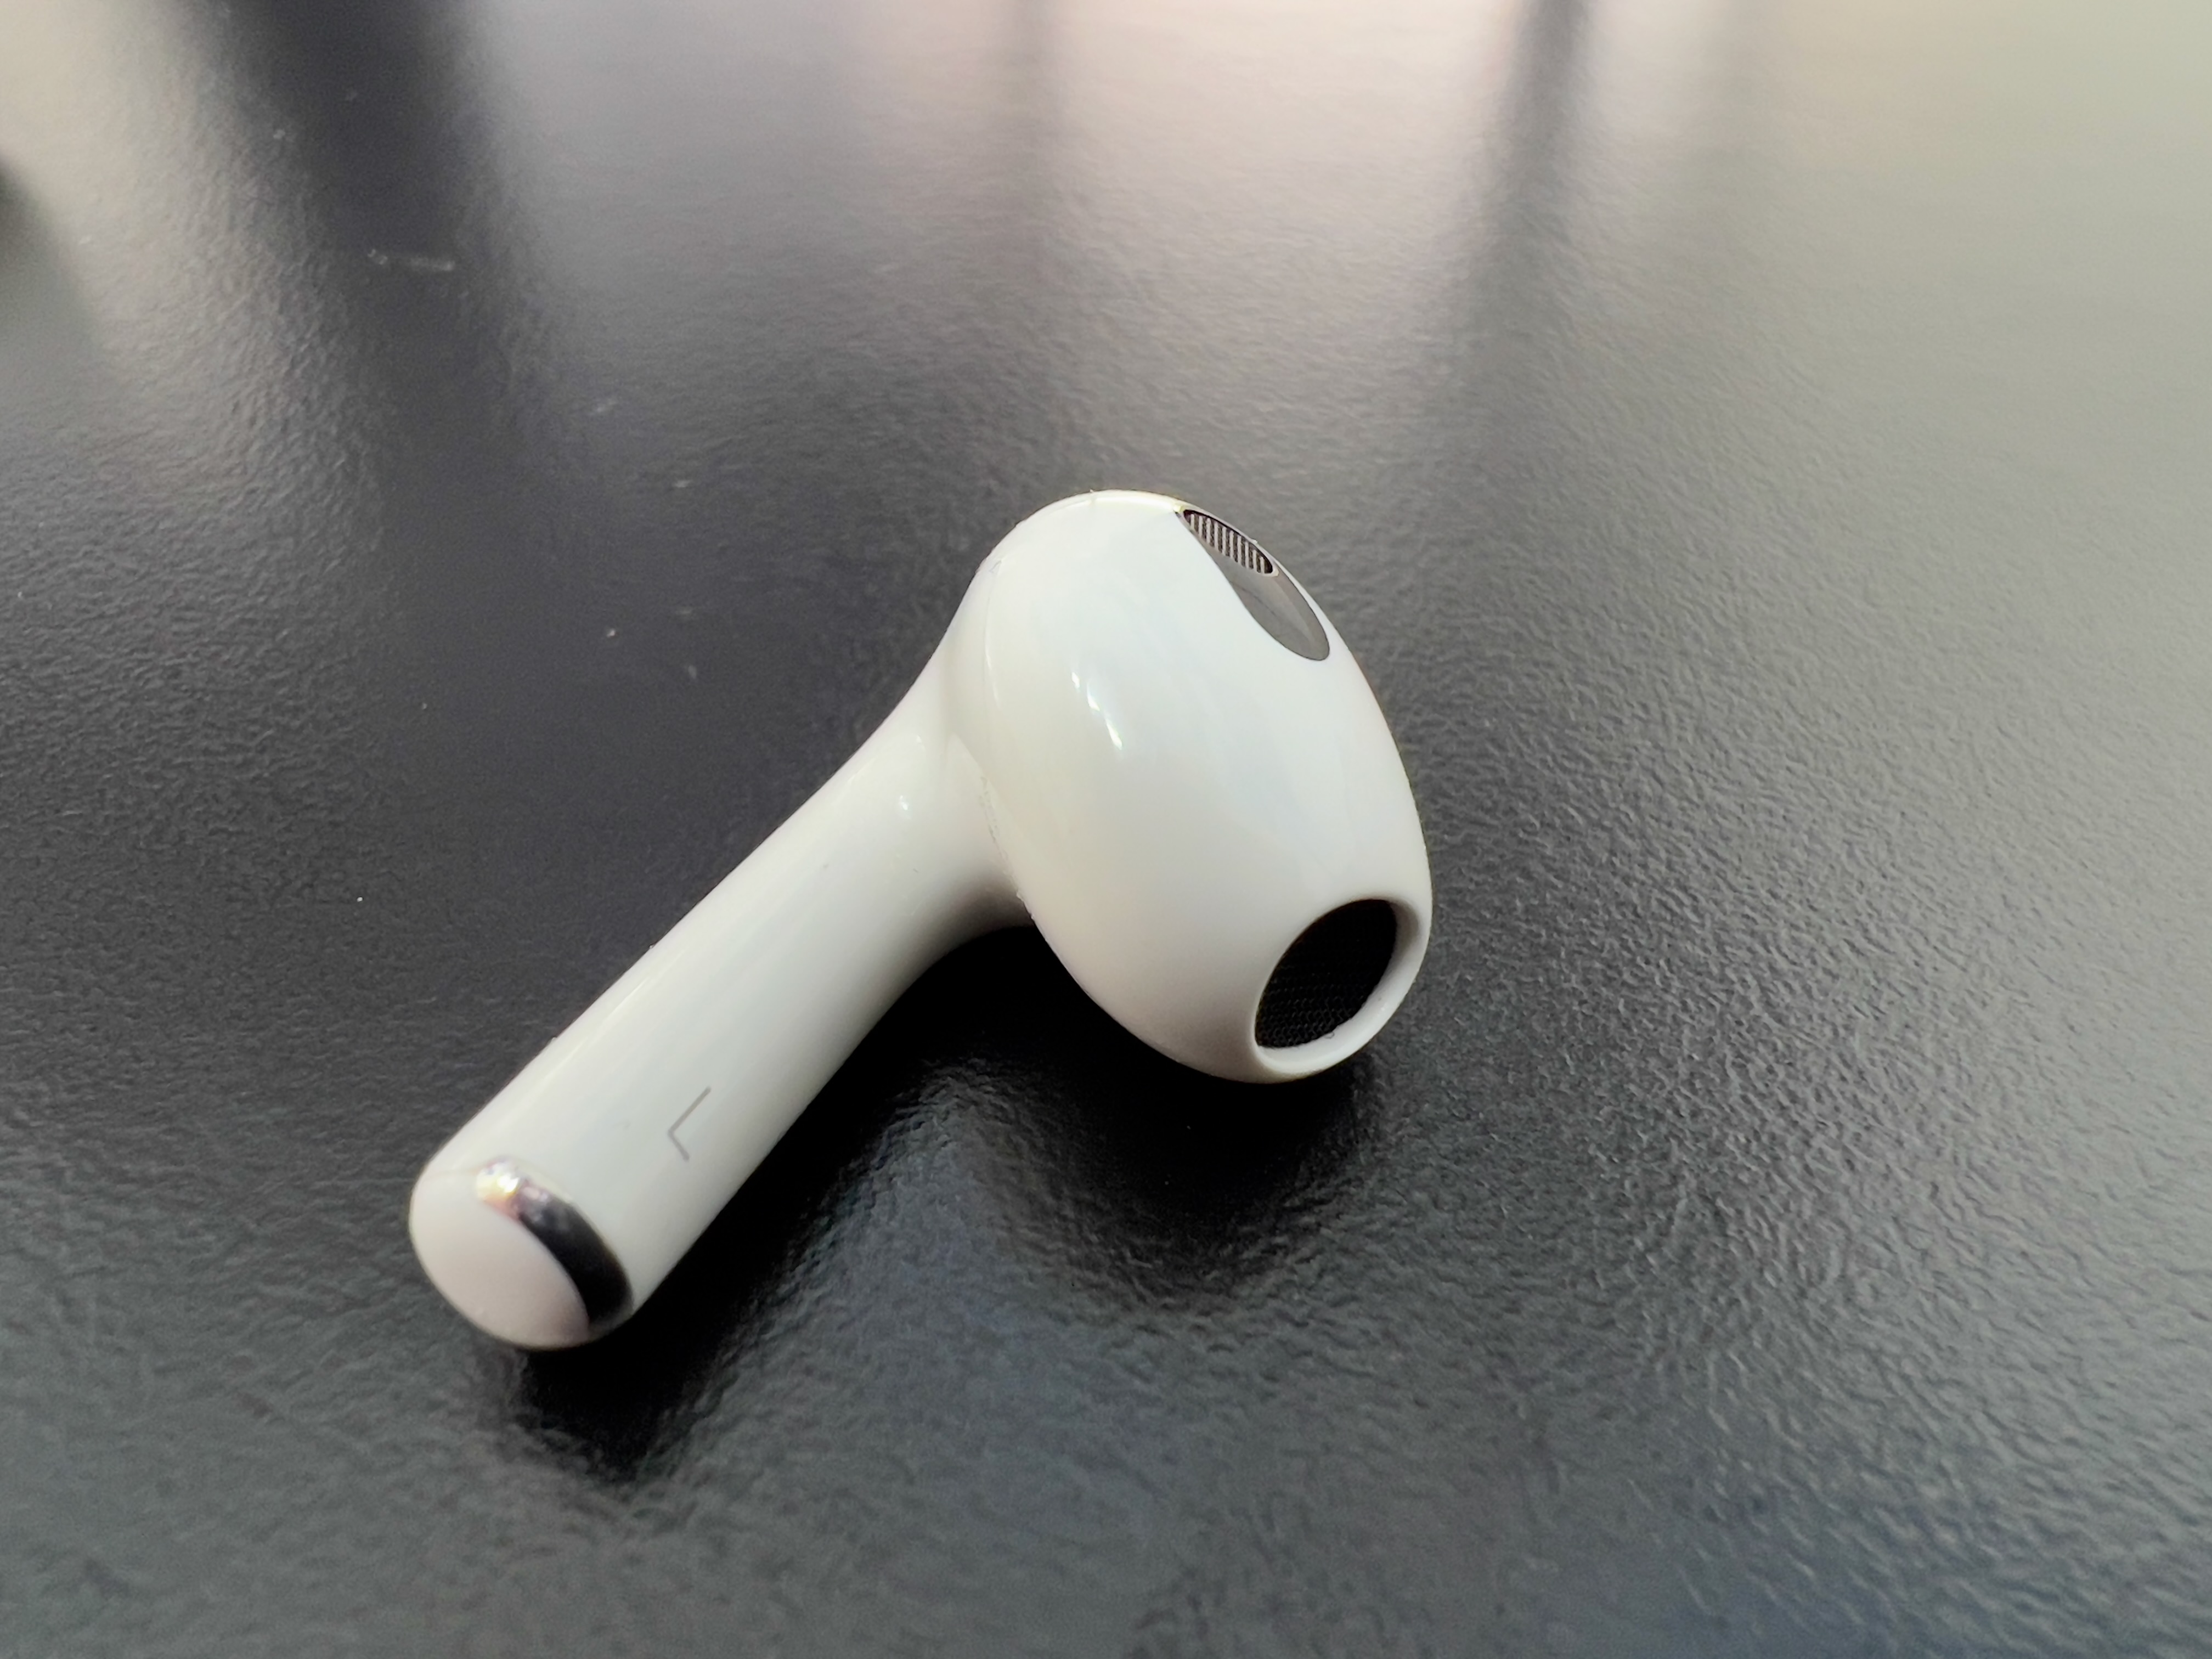 Apple AirPods 2 Announced: Features Brand New H1 Chip, Hey Siri Support,  Faster Device Switching